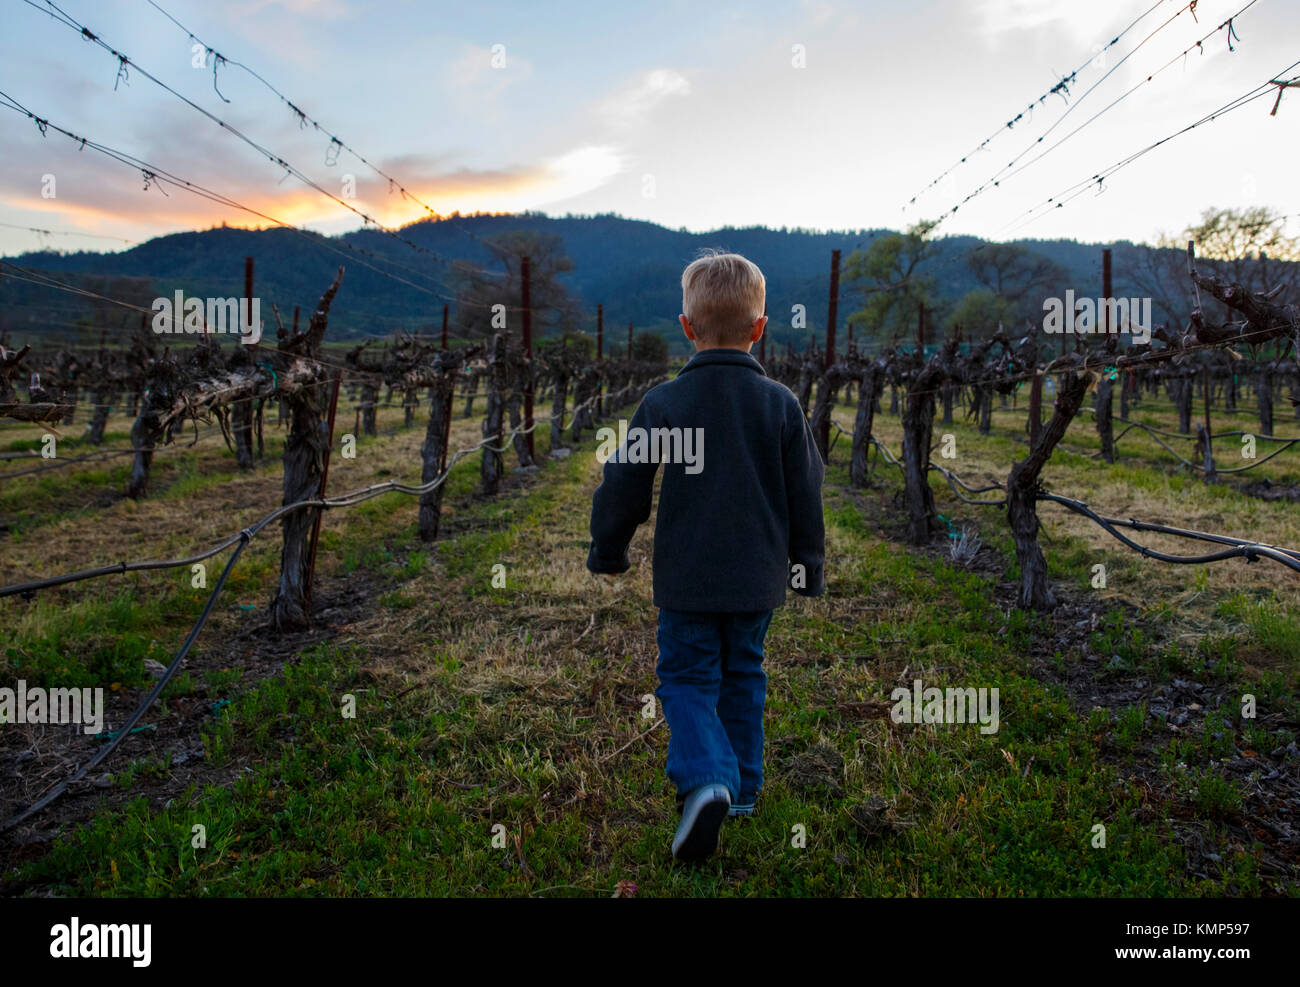 A young child wanders through a vineyard in Napa, California just before sunset. Stock Photo